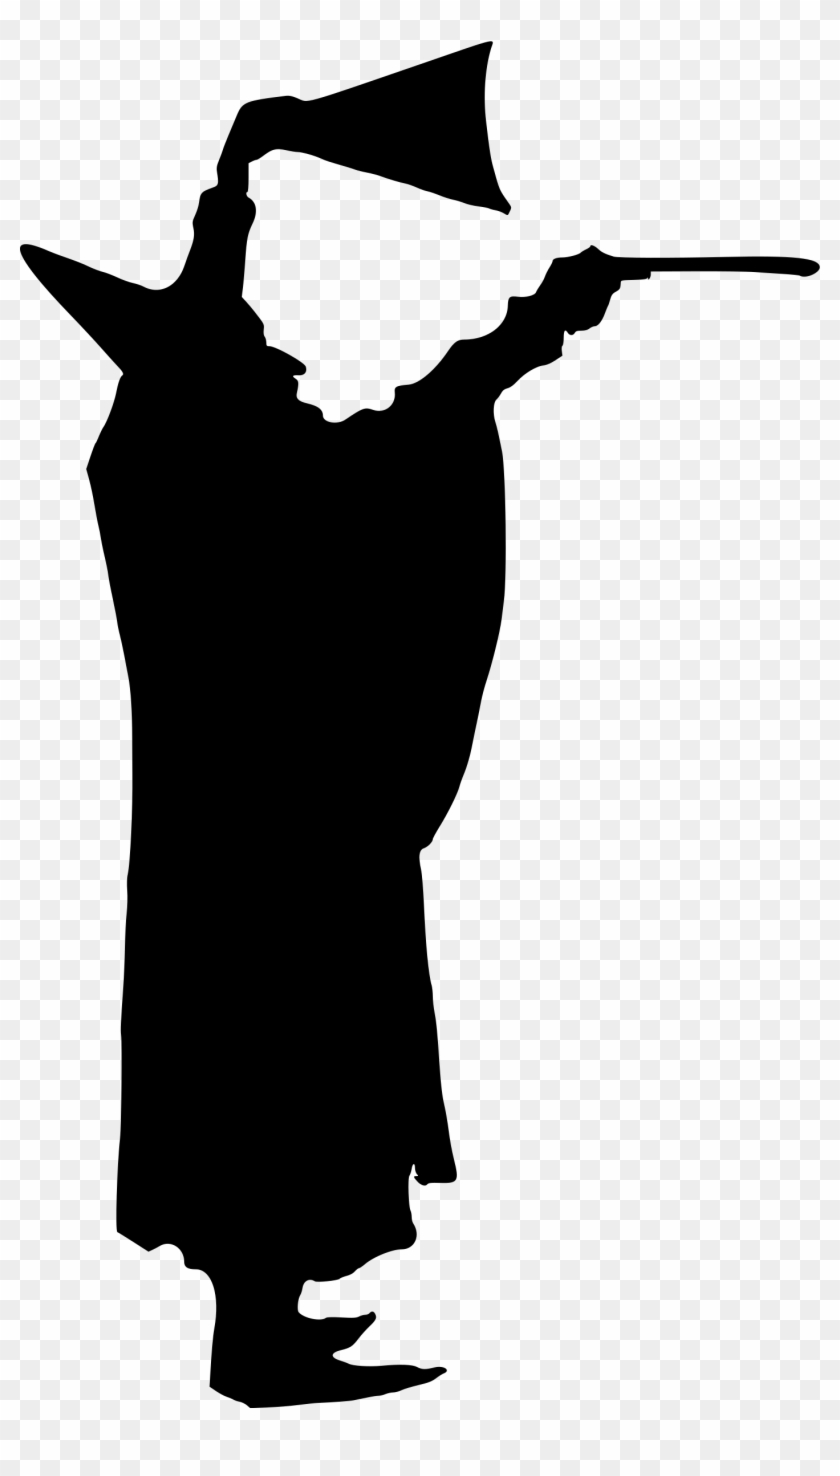 Magician Silhouette - Magician Silhouette Png #1063360